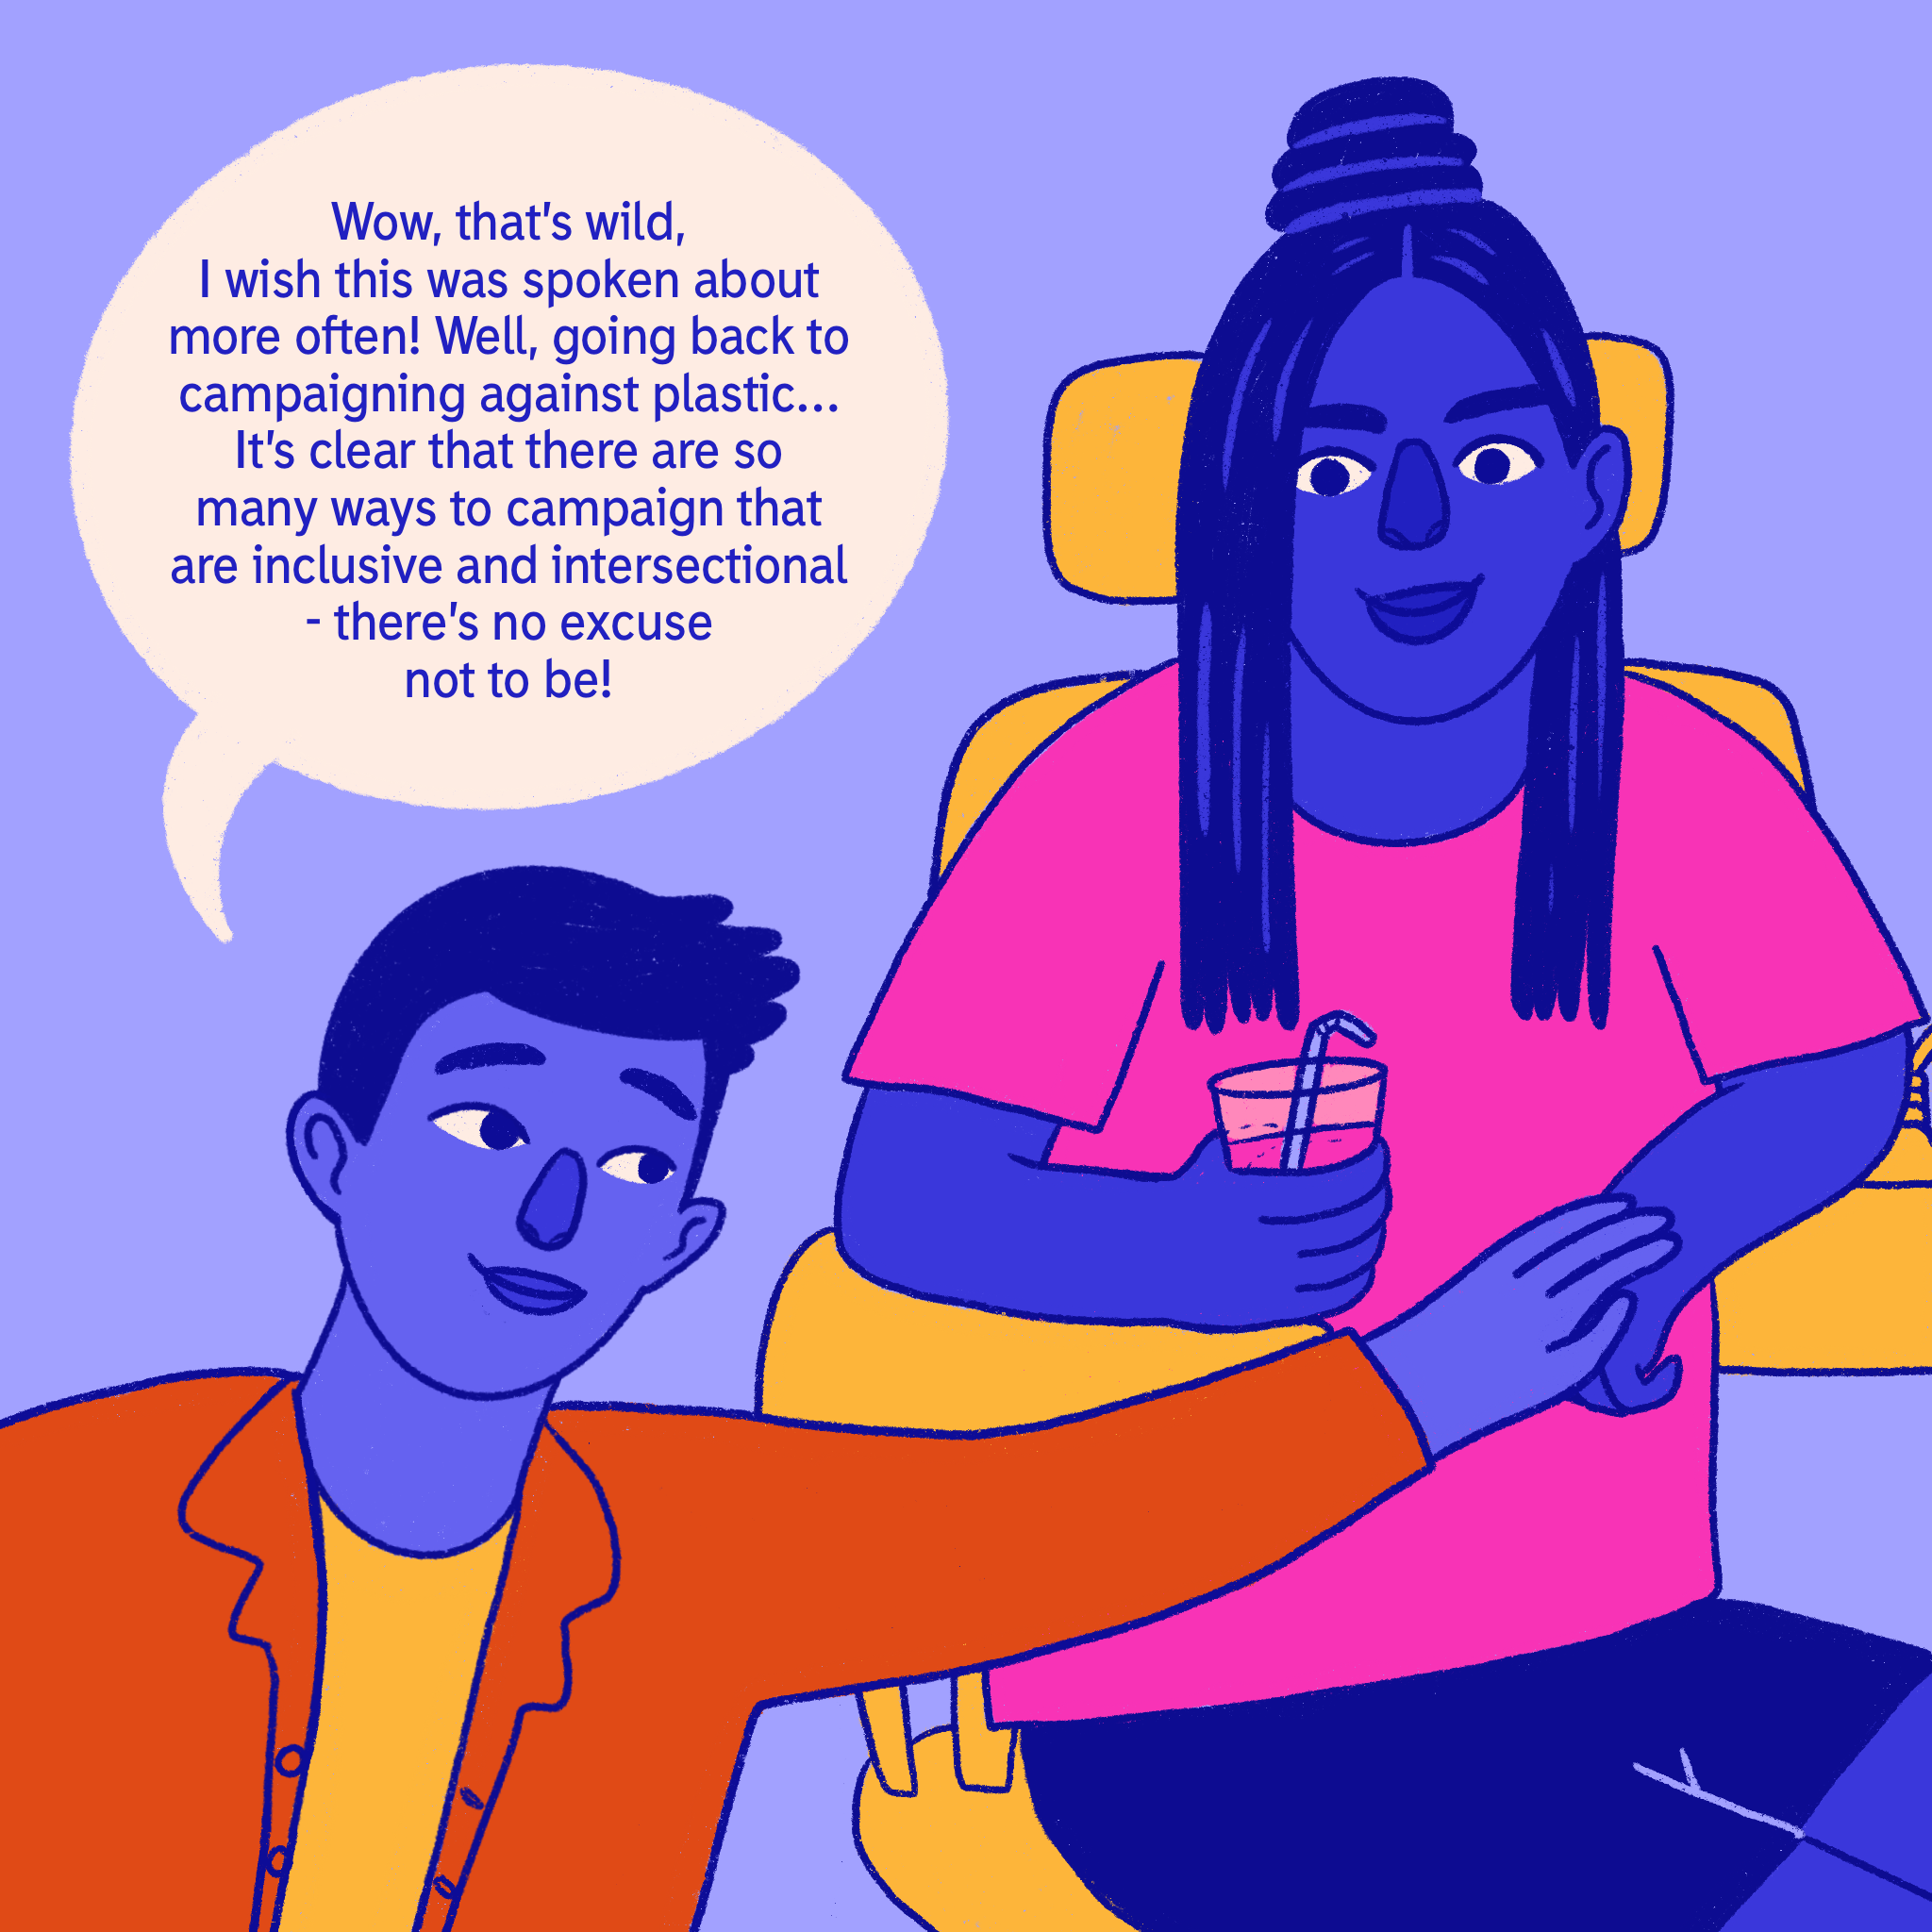 Comic panel 4: Non-disabled character remarks It's clear that there are so many ways to campaign that are inclusive and intersectional - there's no excuse not to be!